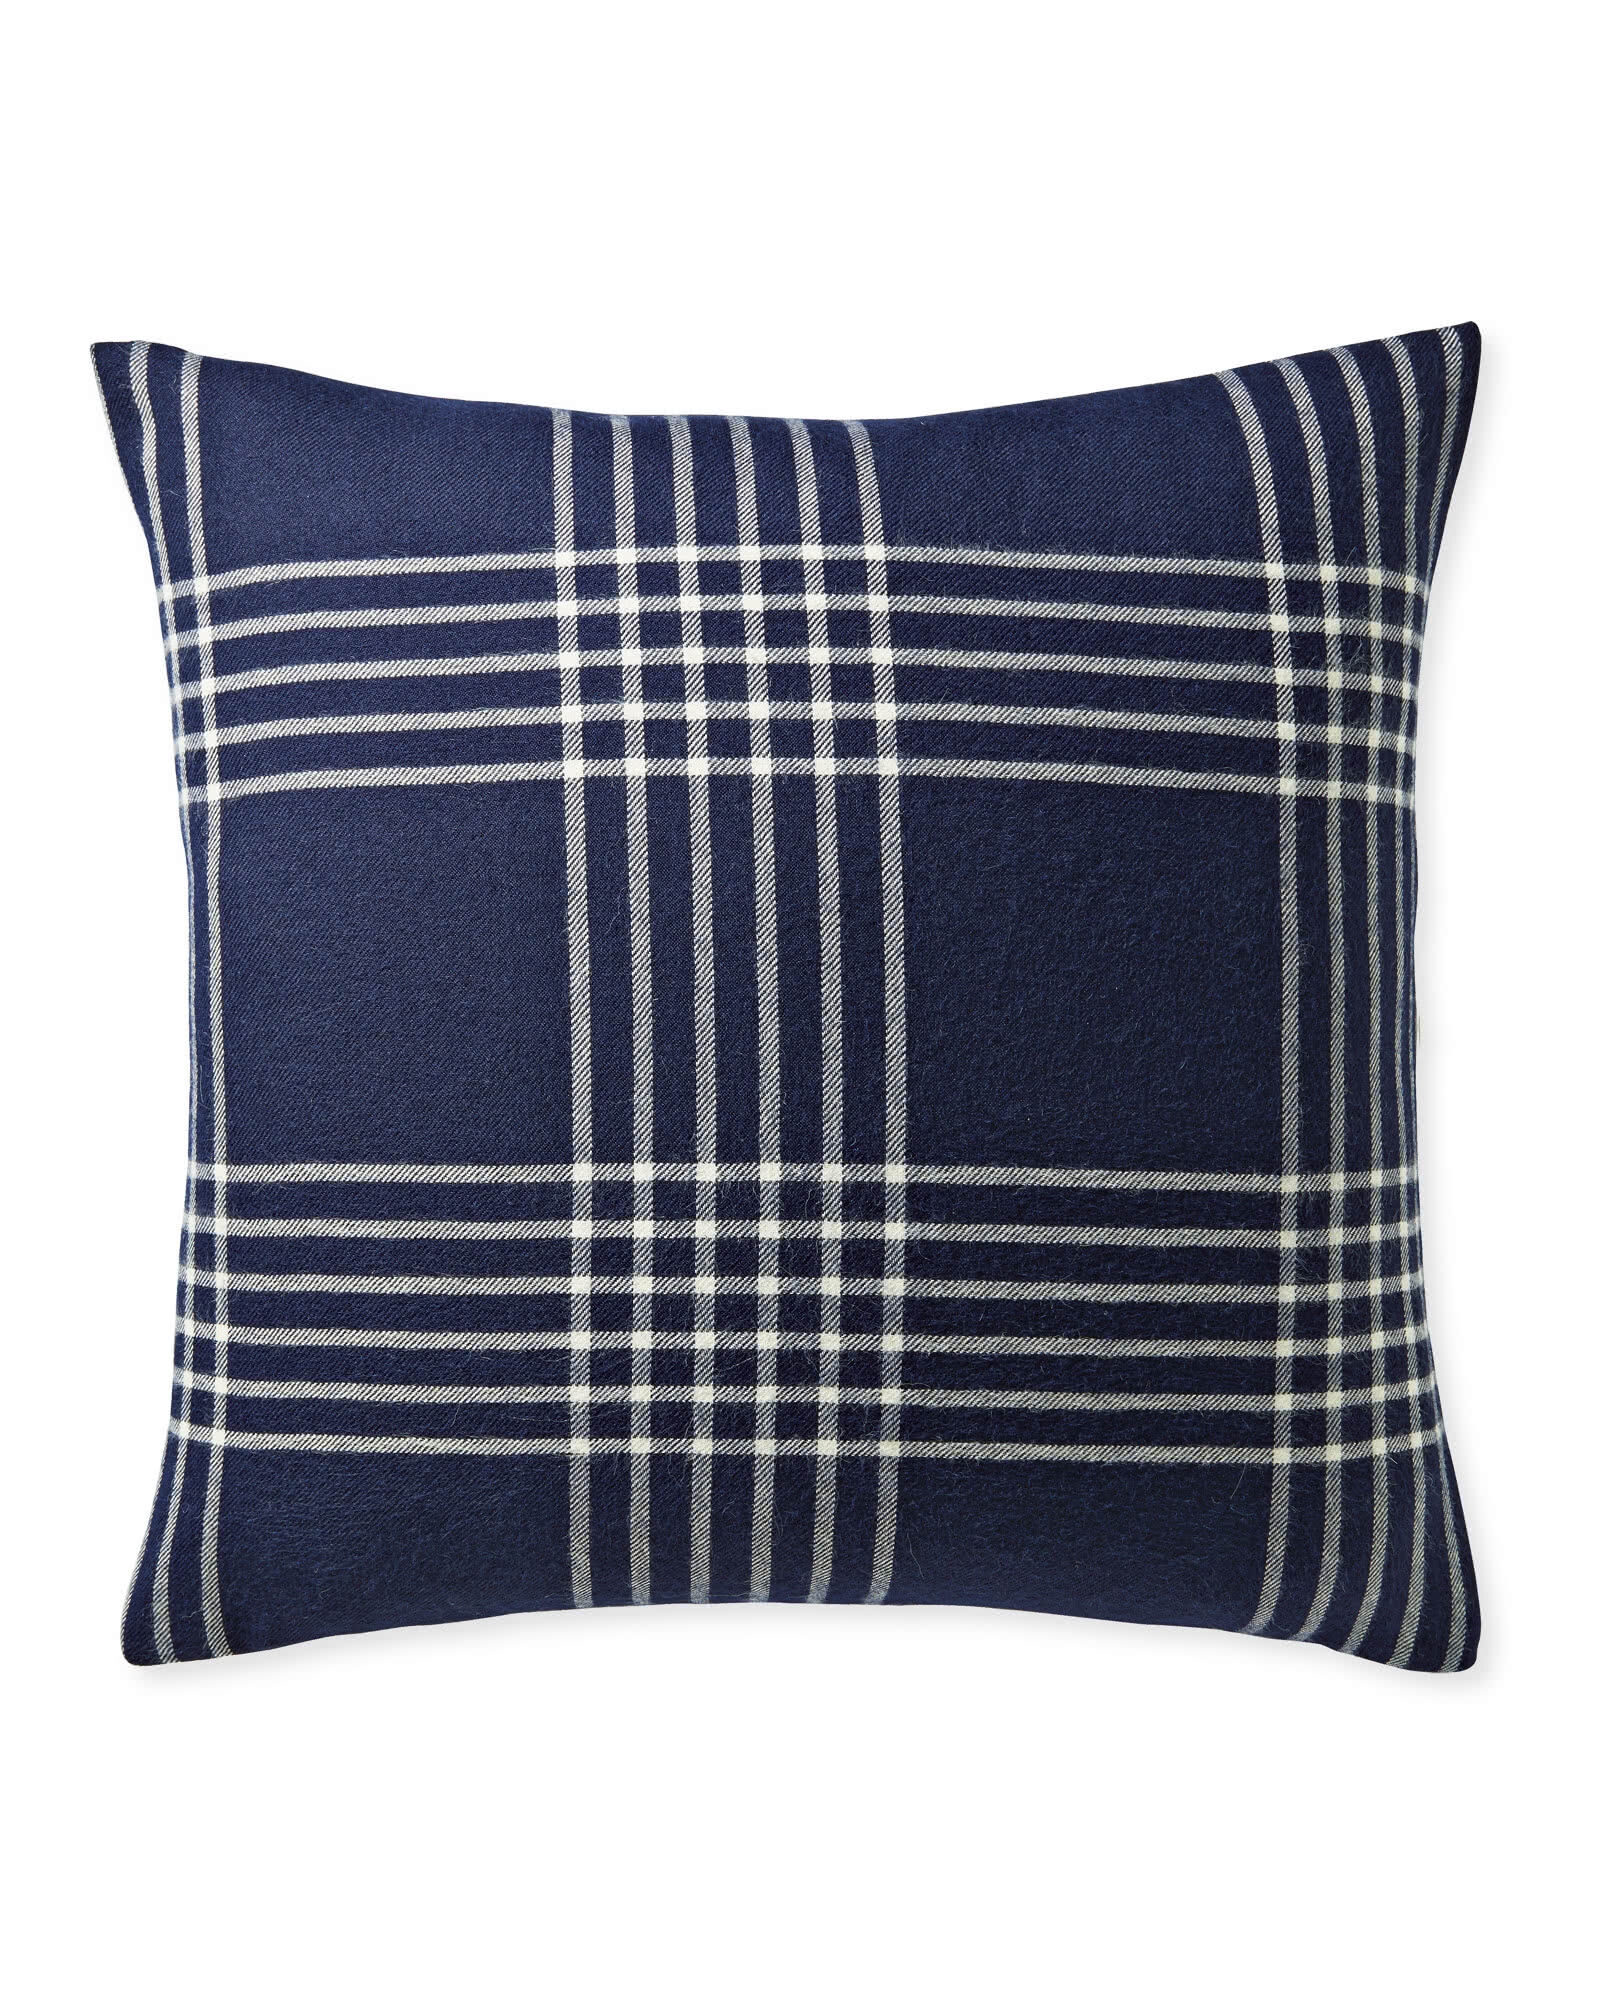 Blakely Plaid Pillow Cover - Image 0